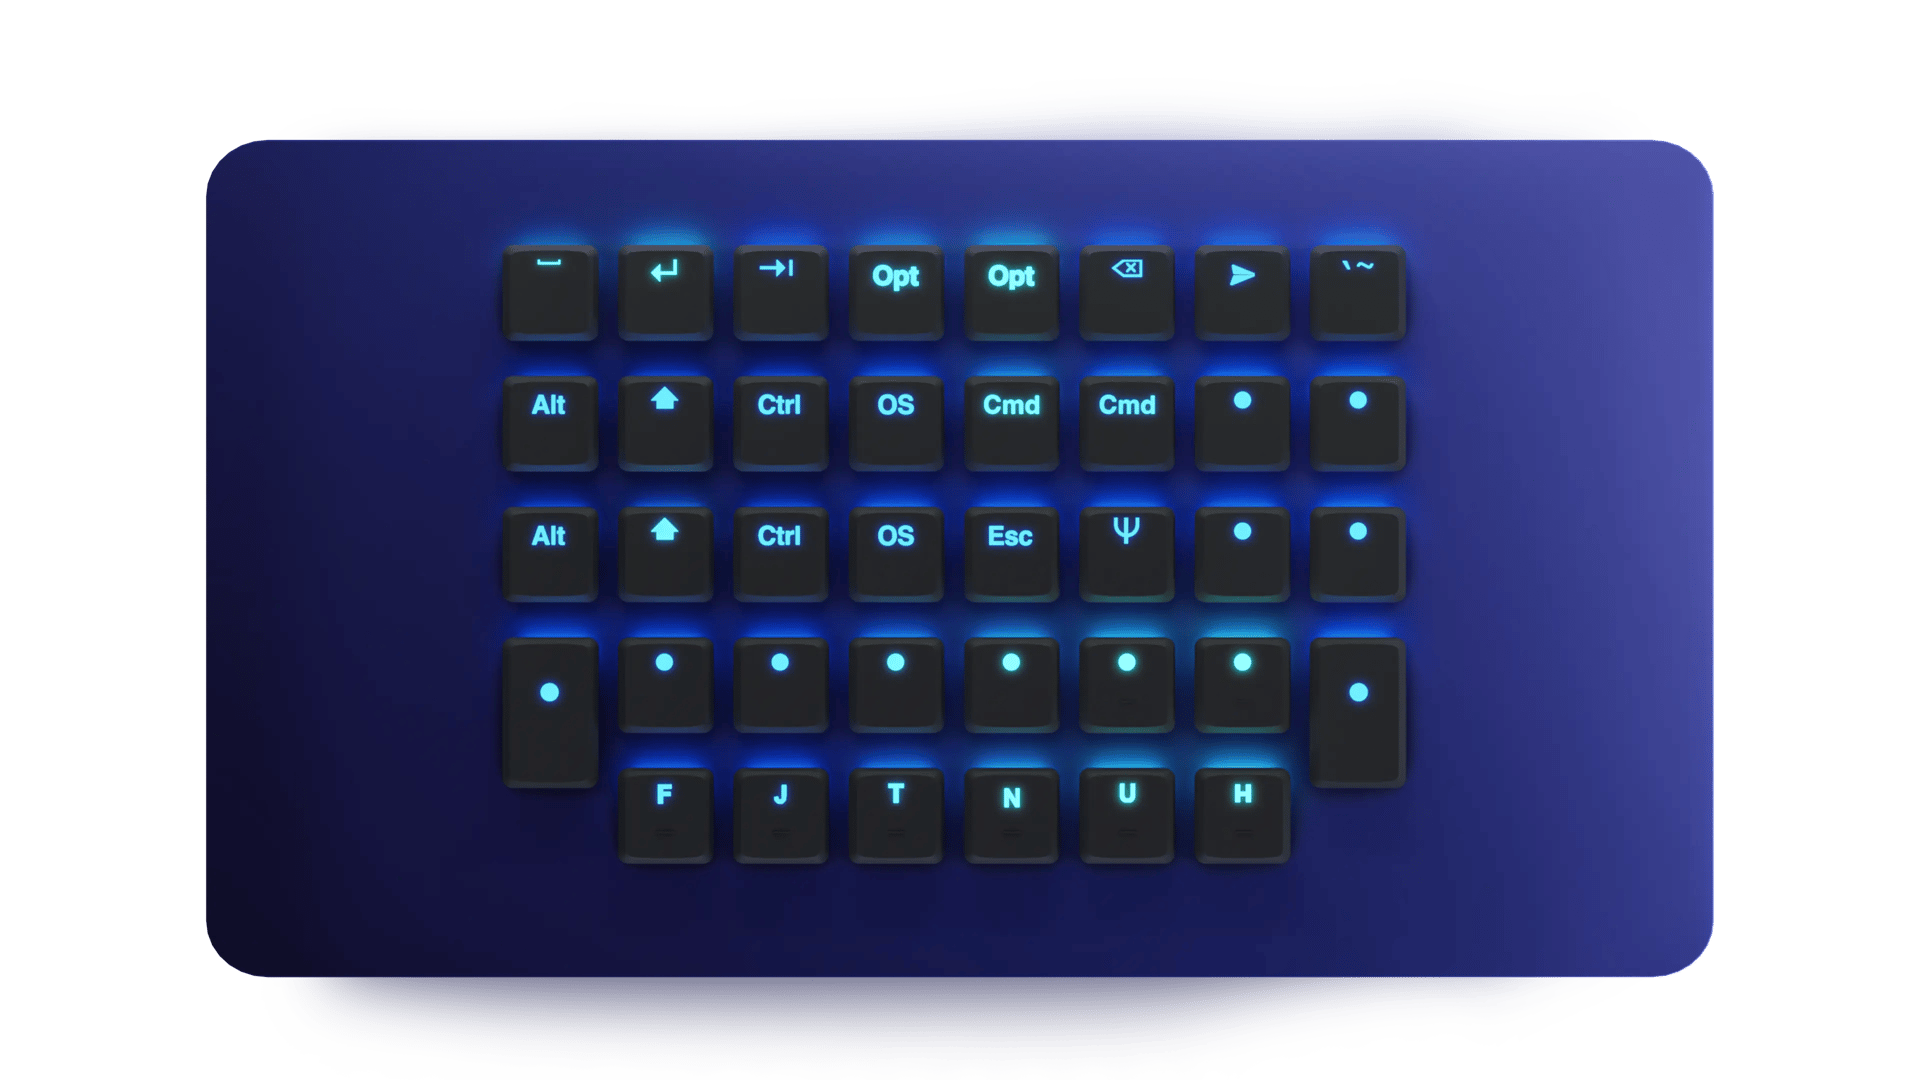 the dark variant extras set of voyager keycaps